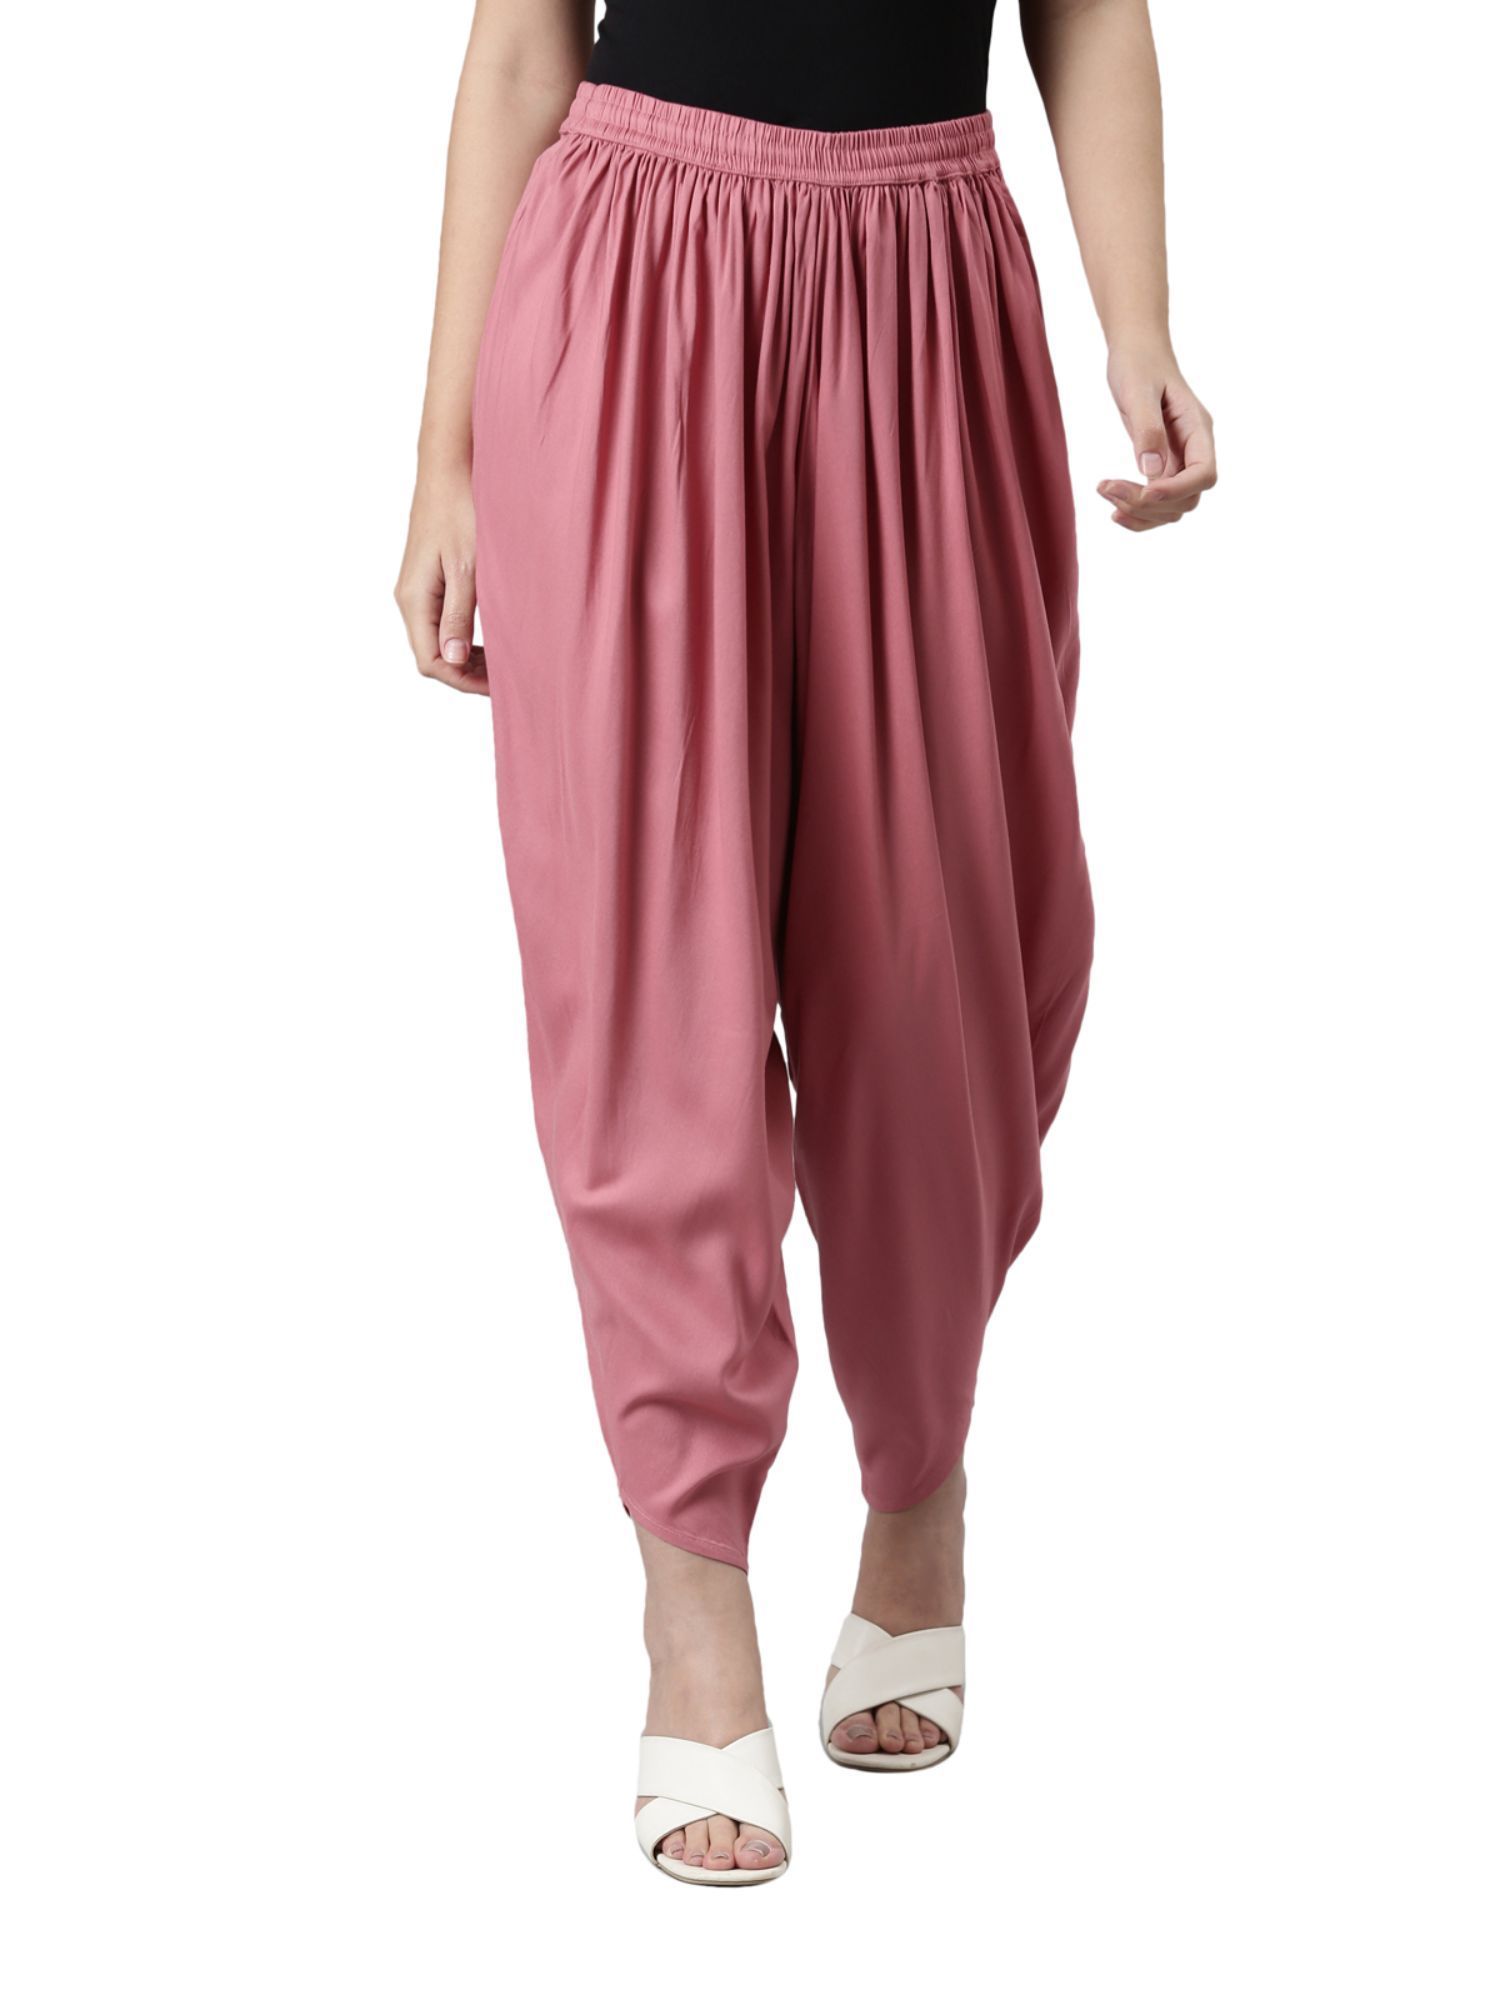 Bottle Green Solid Color Dhoti Harem Pants for Girls & Women – Zubix :  Clothing, Accessories and Home Furnishing Shop Online